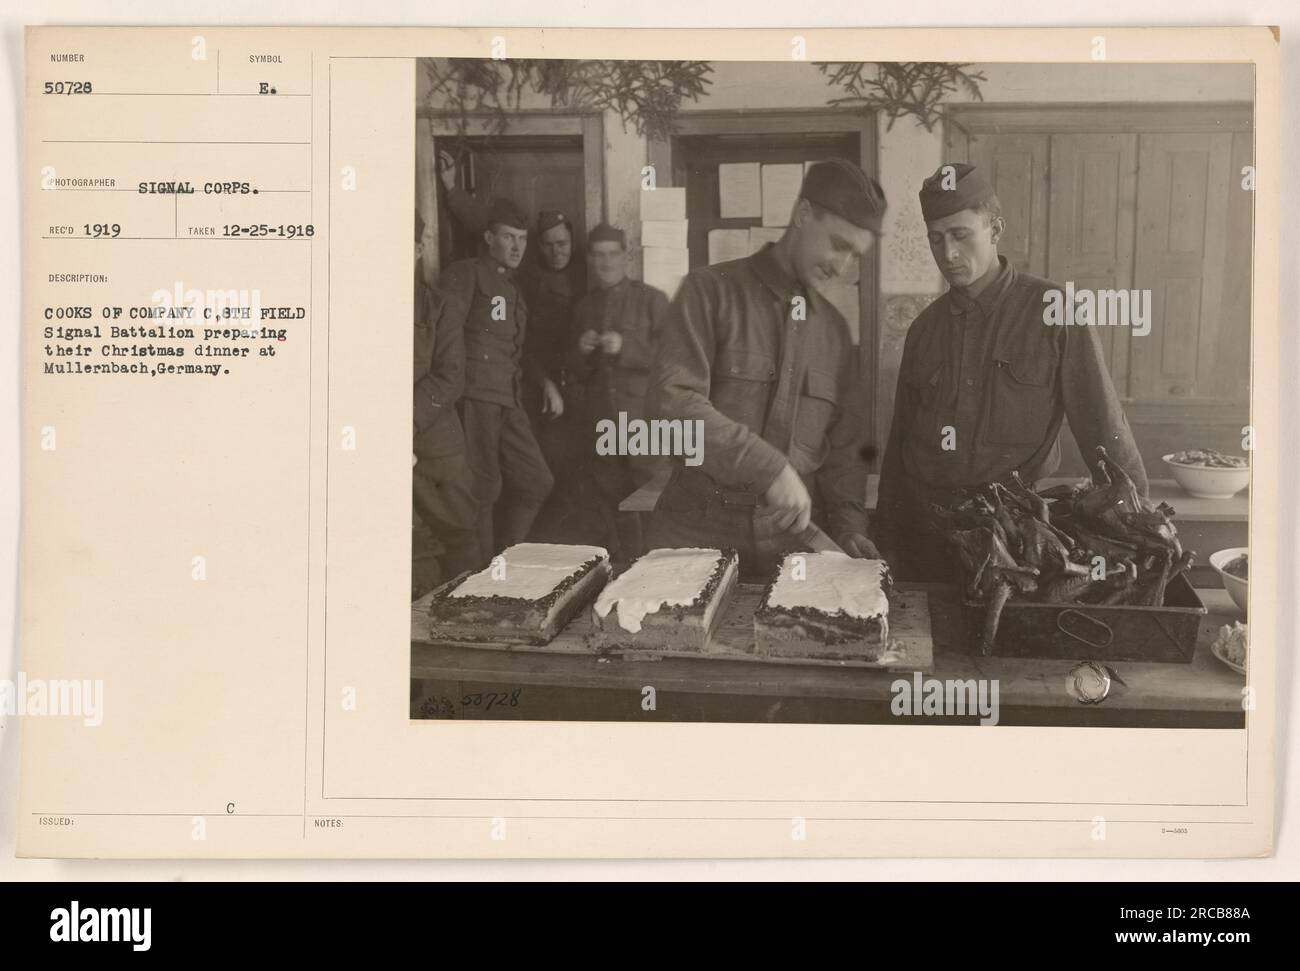 Cooks from Company C, 8th Field Signal Battalion, are seen preparing their Christmas dinner at Mullernbach, Germany. The photograph, taken on 25th December 1918 by the Signal Corps, showcases the soldiers cooking for the festive occasion. The image is labeled as number 50728 in the series. Stock Photo